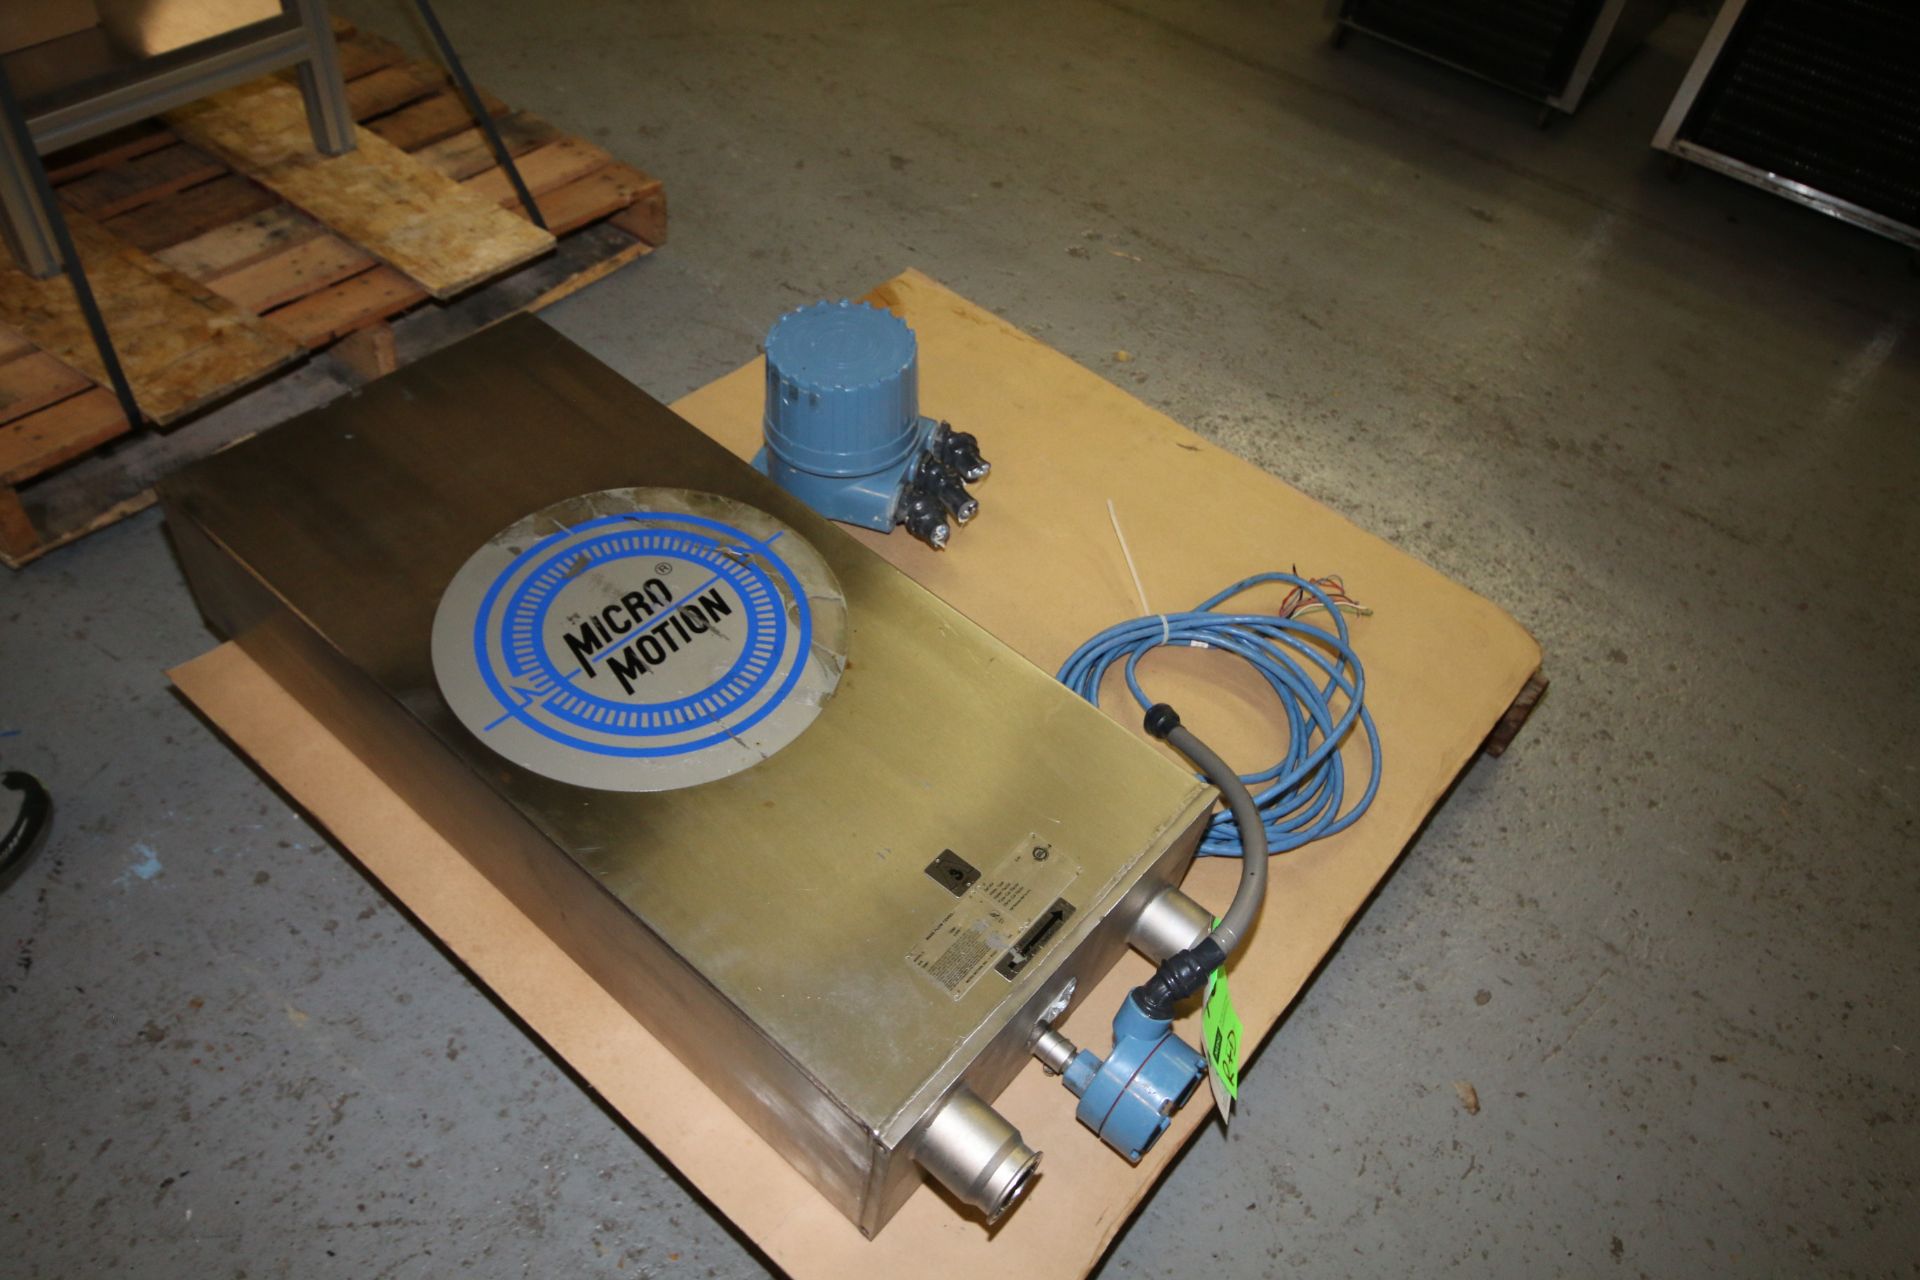 Micro Motion 2" CT In-Line S/S Mass Flow Meter, Model D - 1200S226, SN 144628 - Image 3 of 3